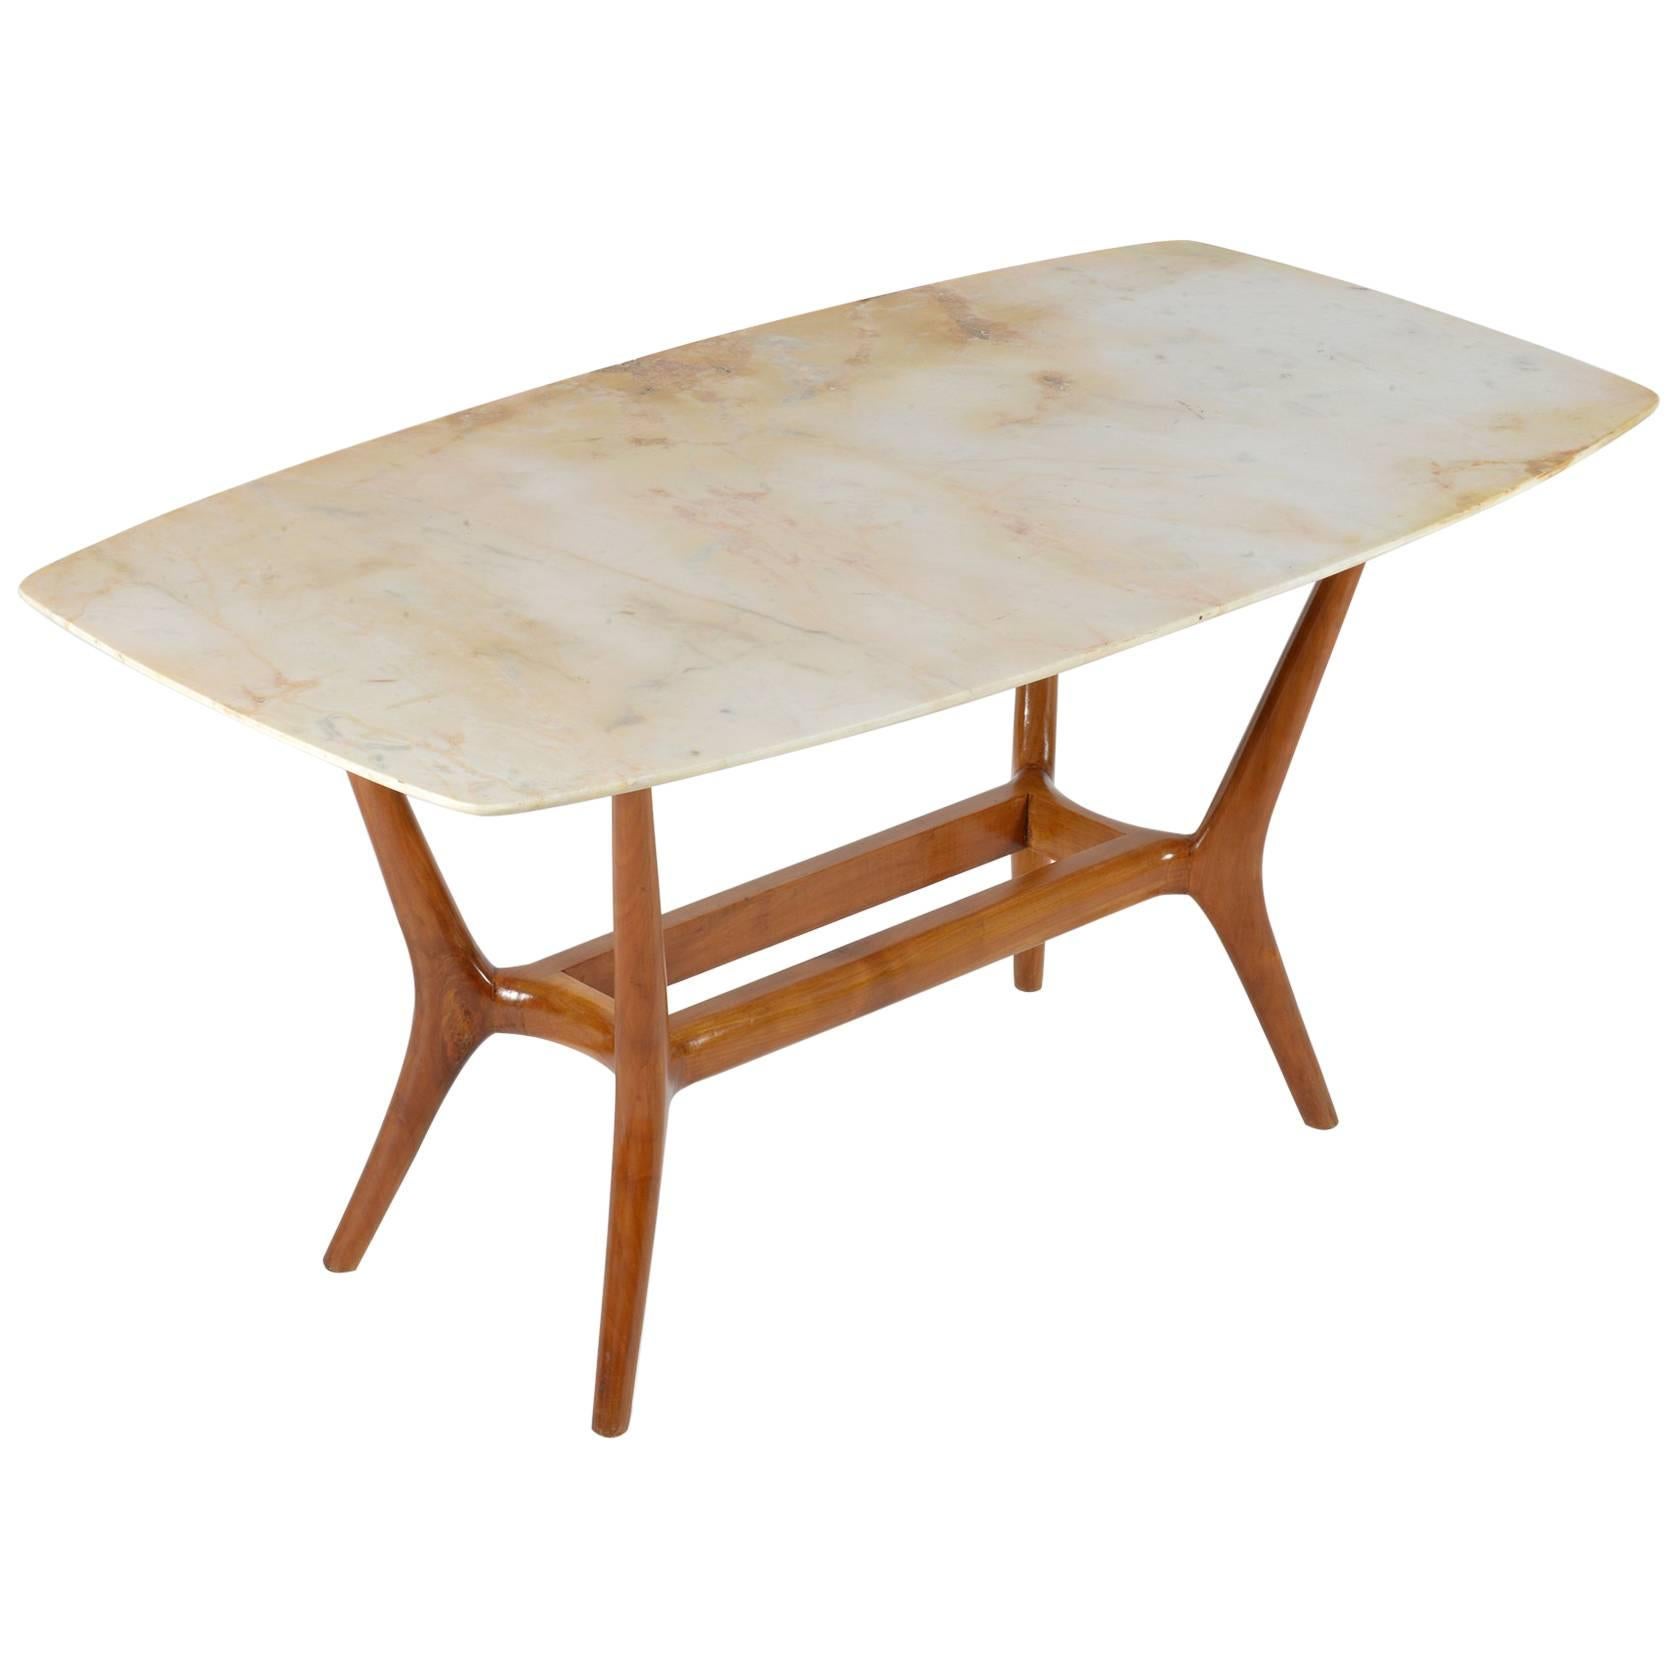 Italian Midcentury Solid Wood and Marble-Top Coffee Table